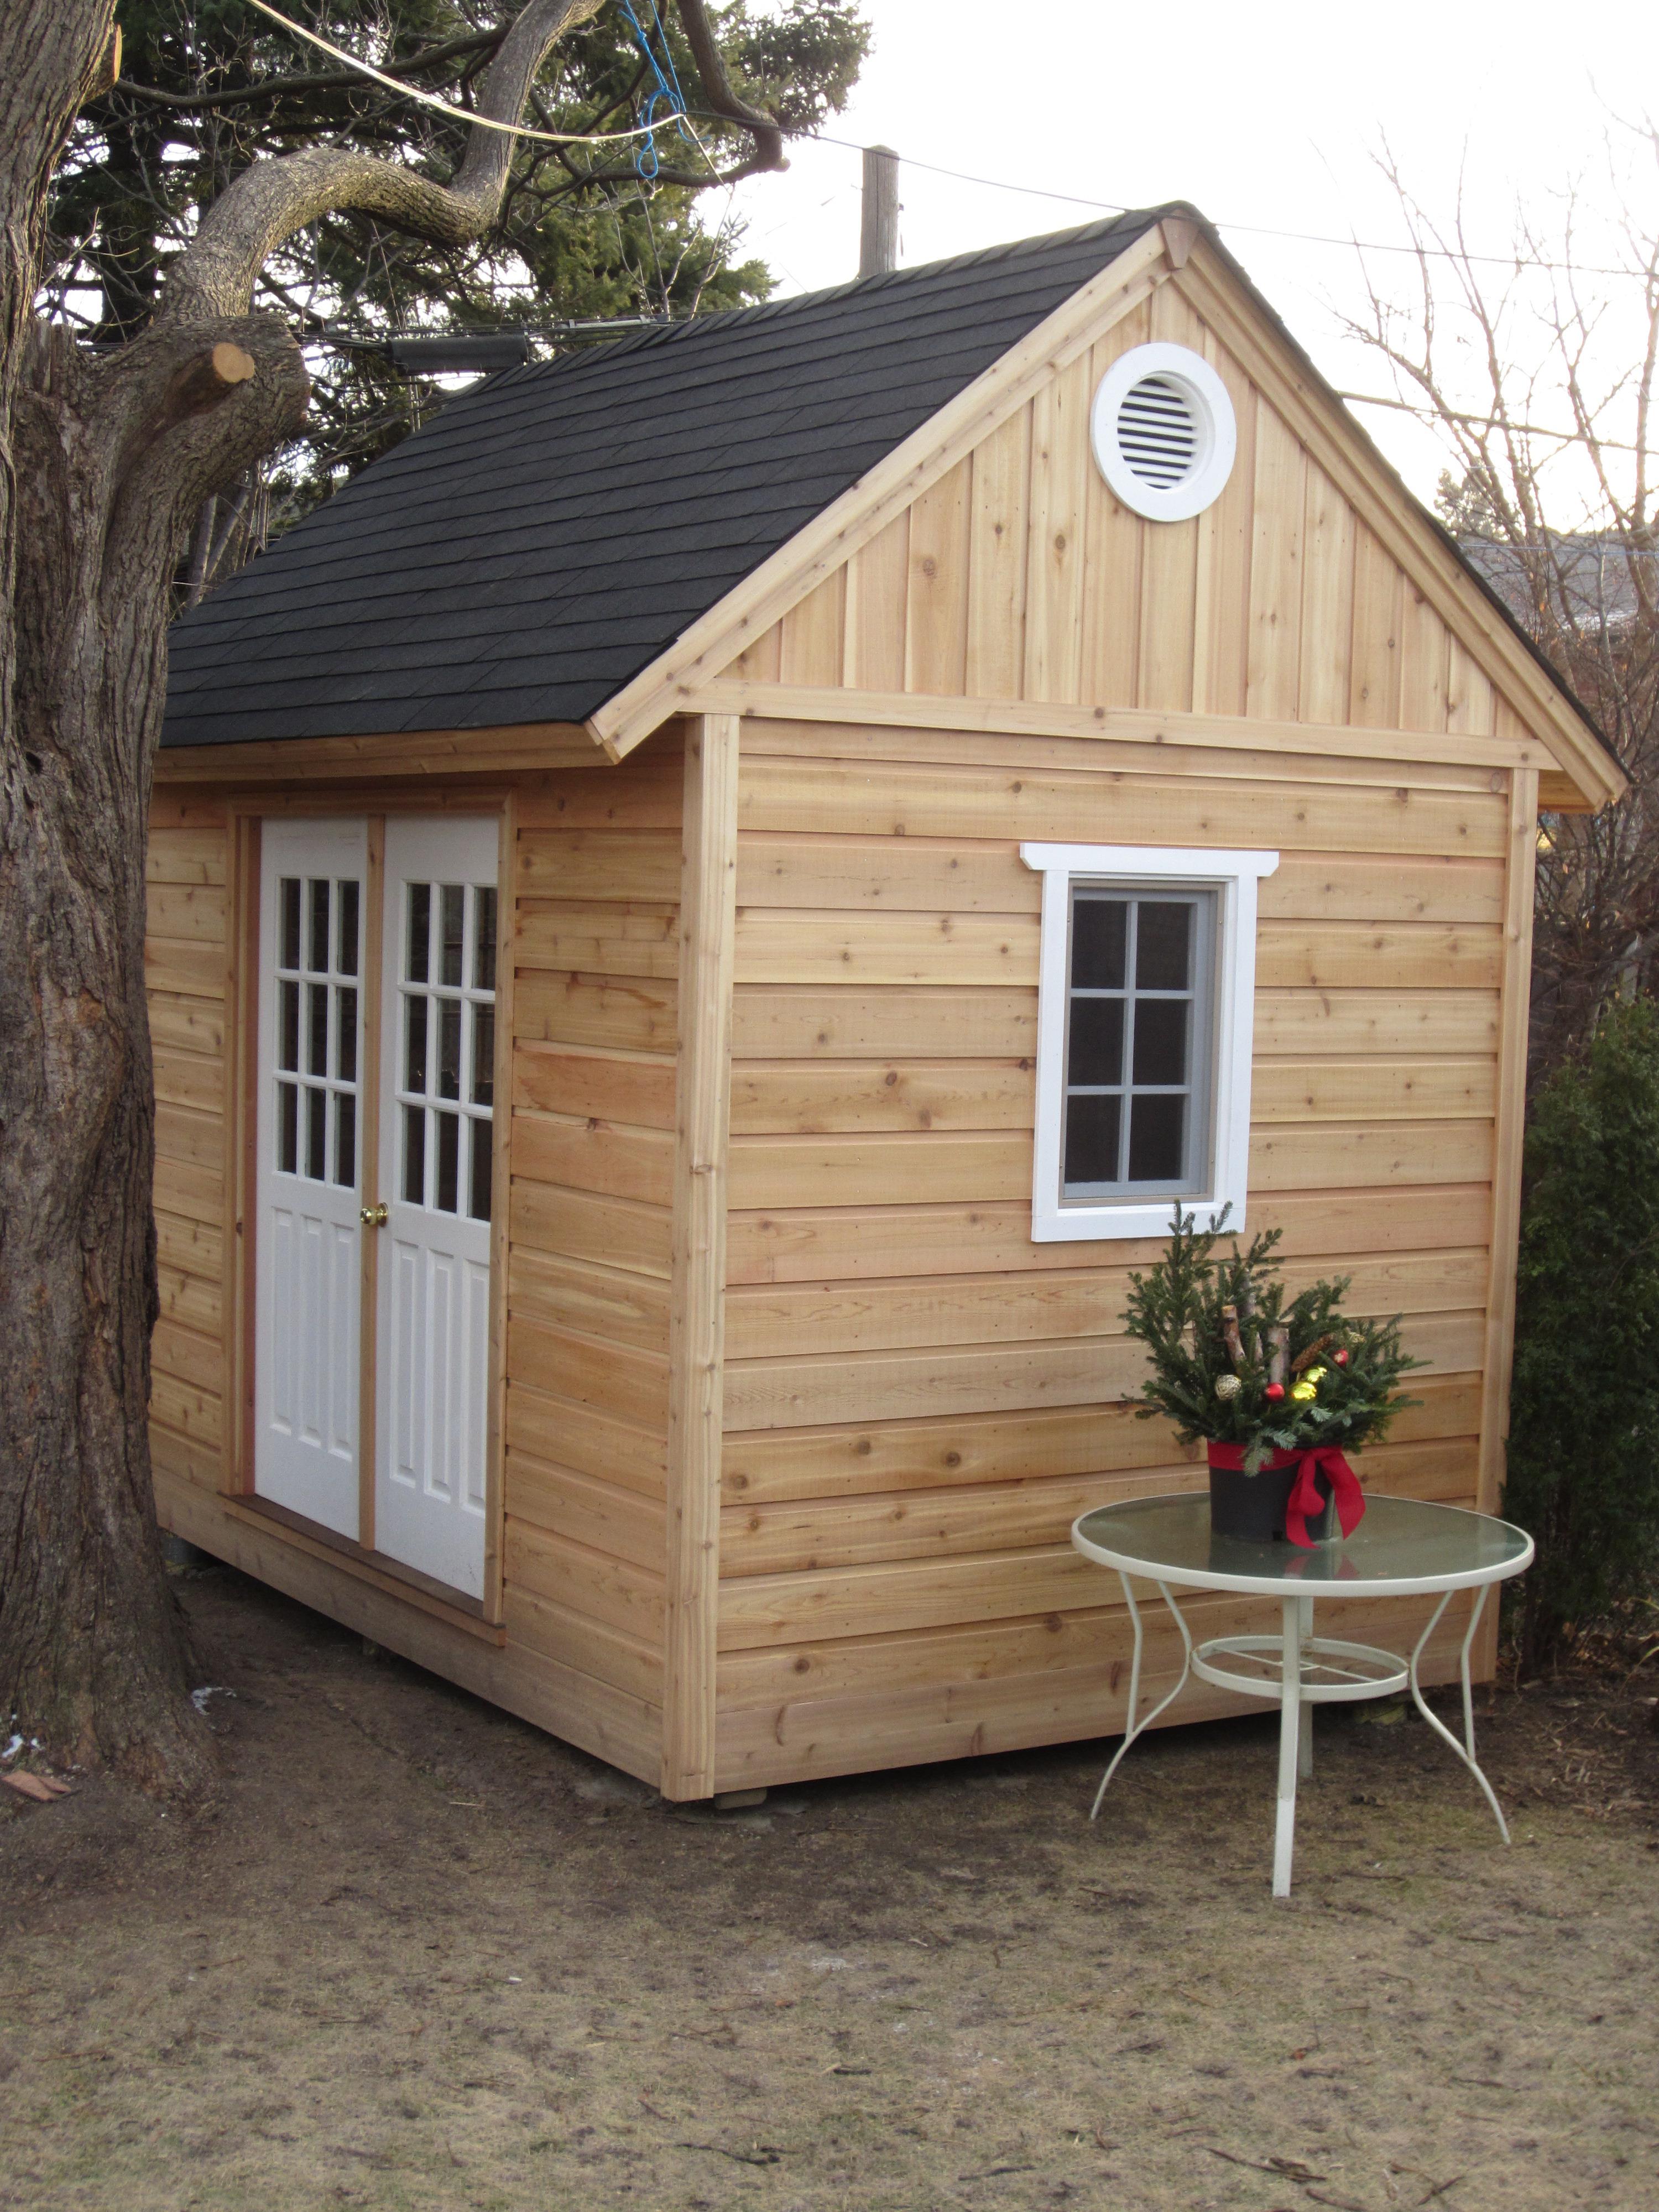 Telluride shed plan 8x12 with Double deluxe 18-lite doors in Los Angeles California. ID number 18451